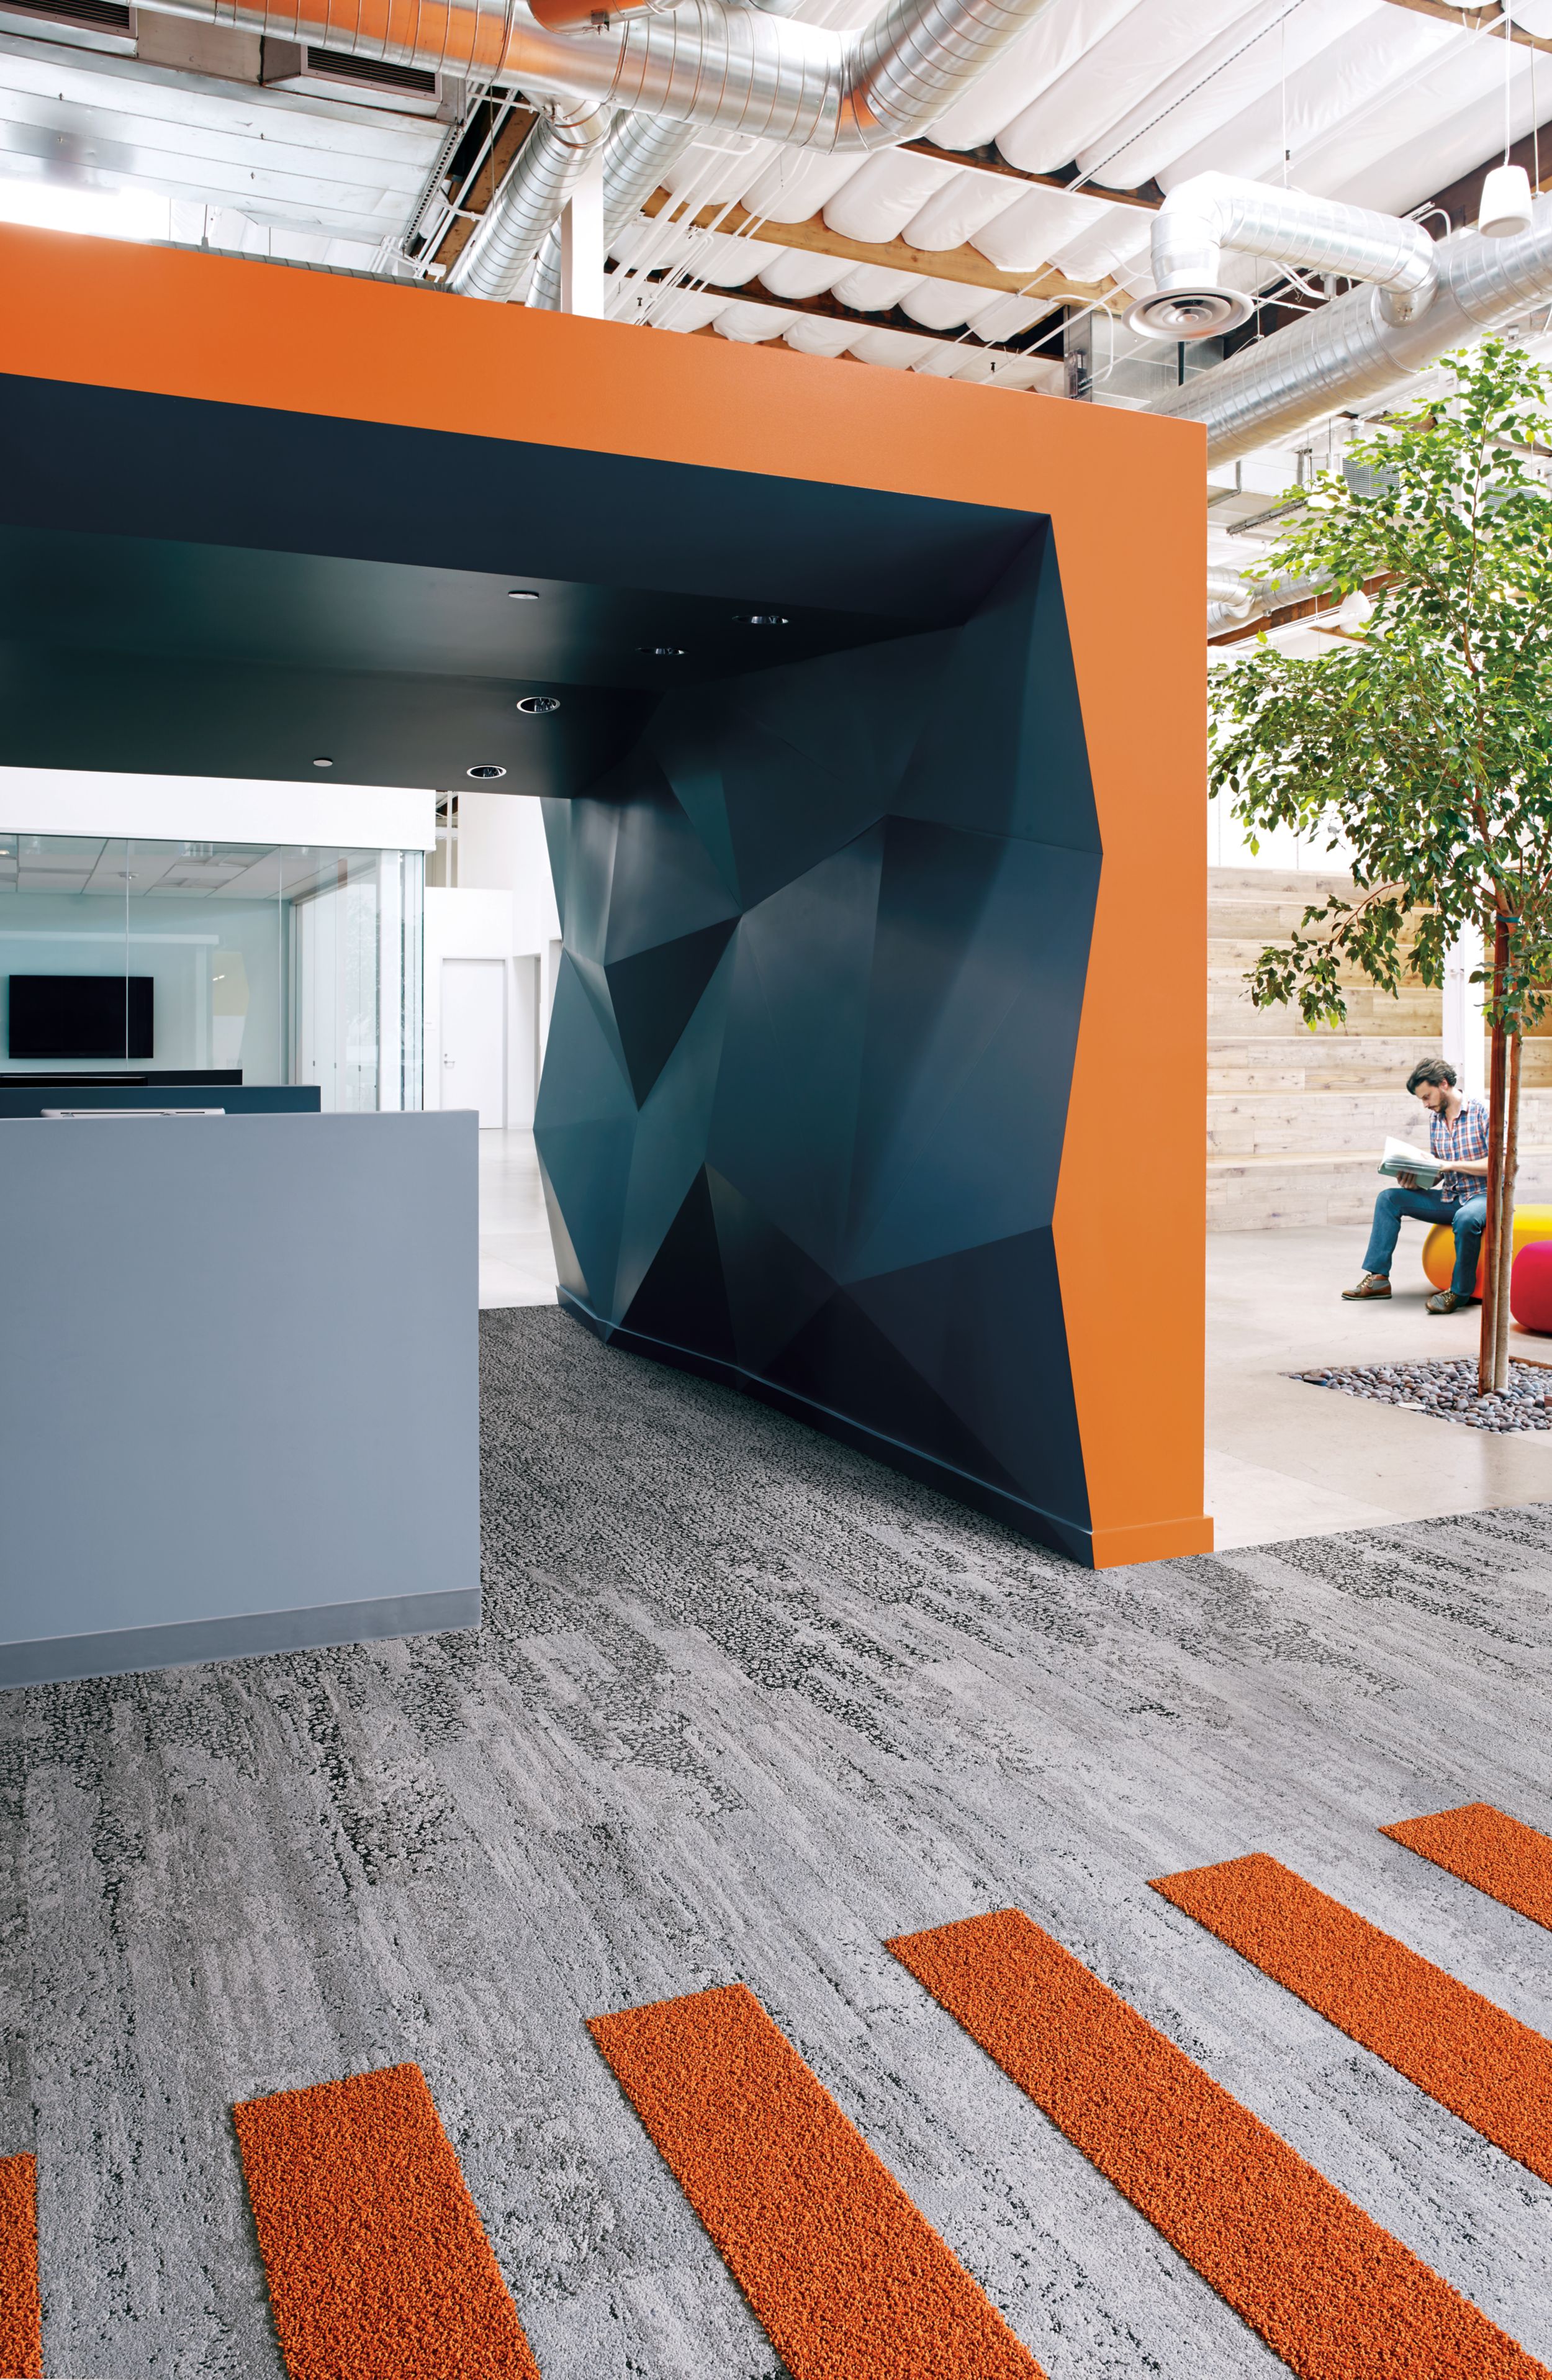 Interface HN810, HN830, HN840 and HN850 plank carpet tiles in blue and orange covered space with man reading on ball chair número de imagen 5